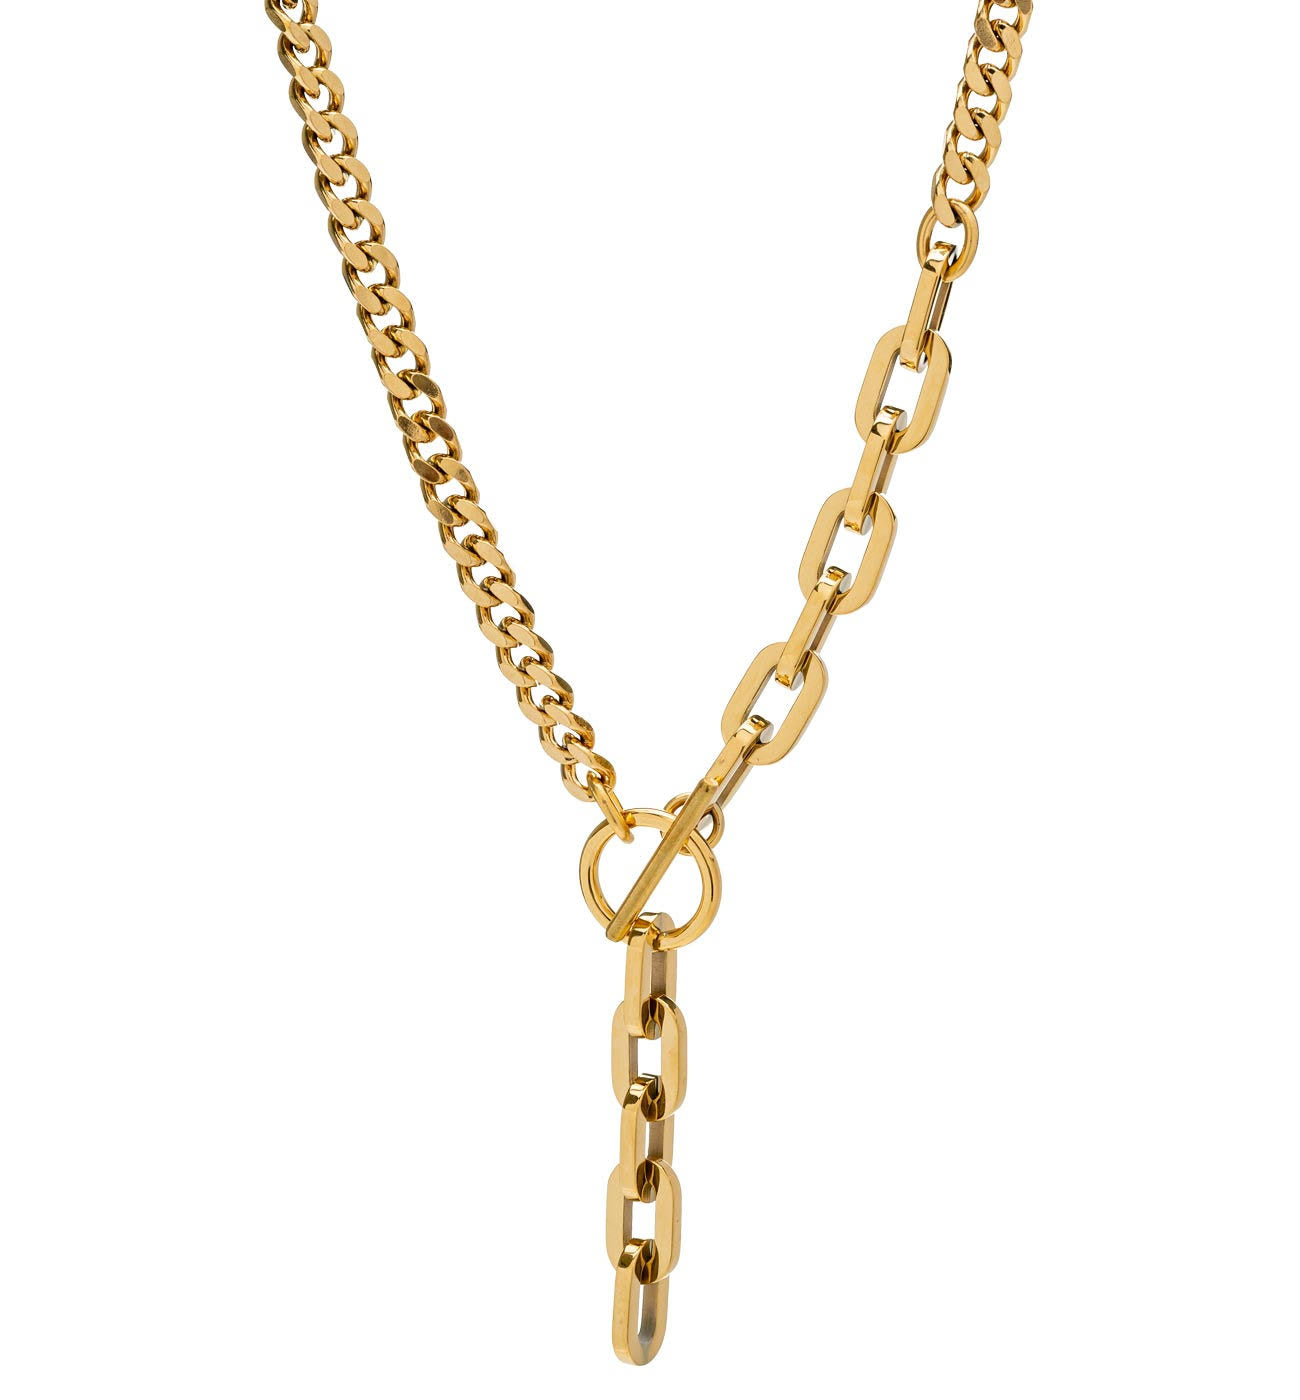 gold lariat necklace. Water and tarnish resistant